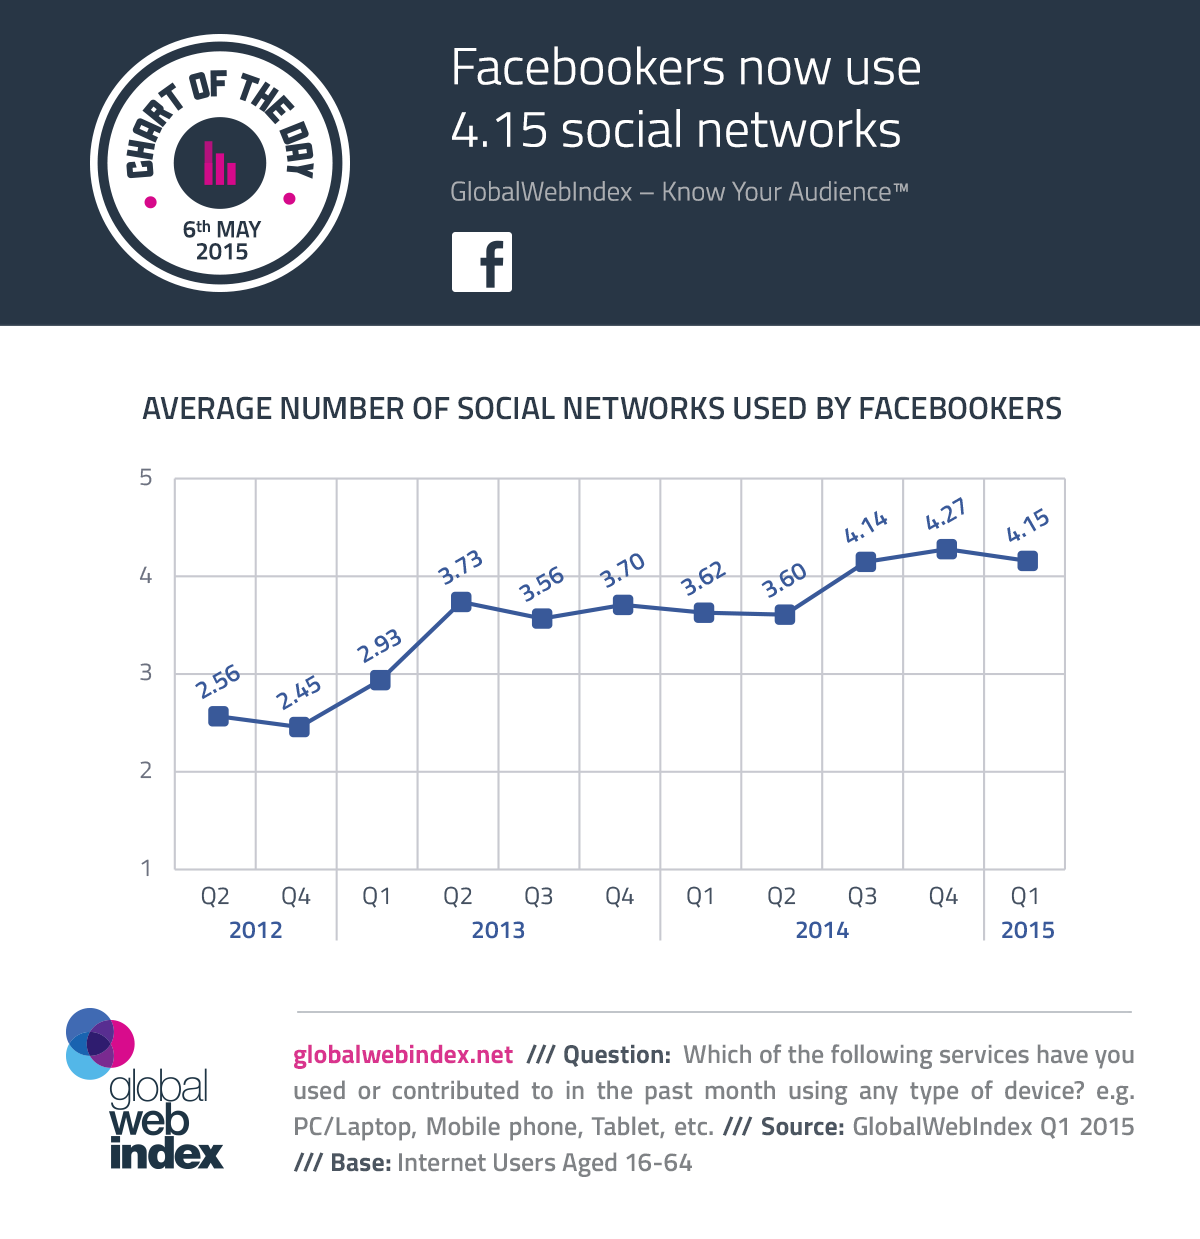 Facebookers now use 4.15 social networks